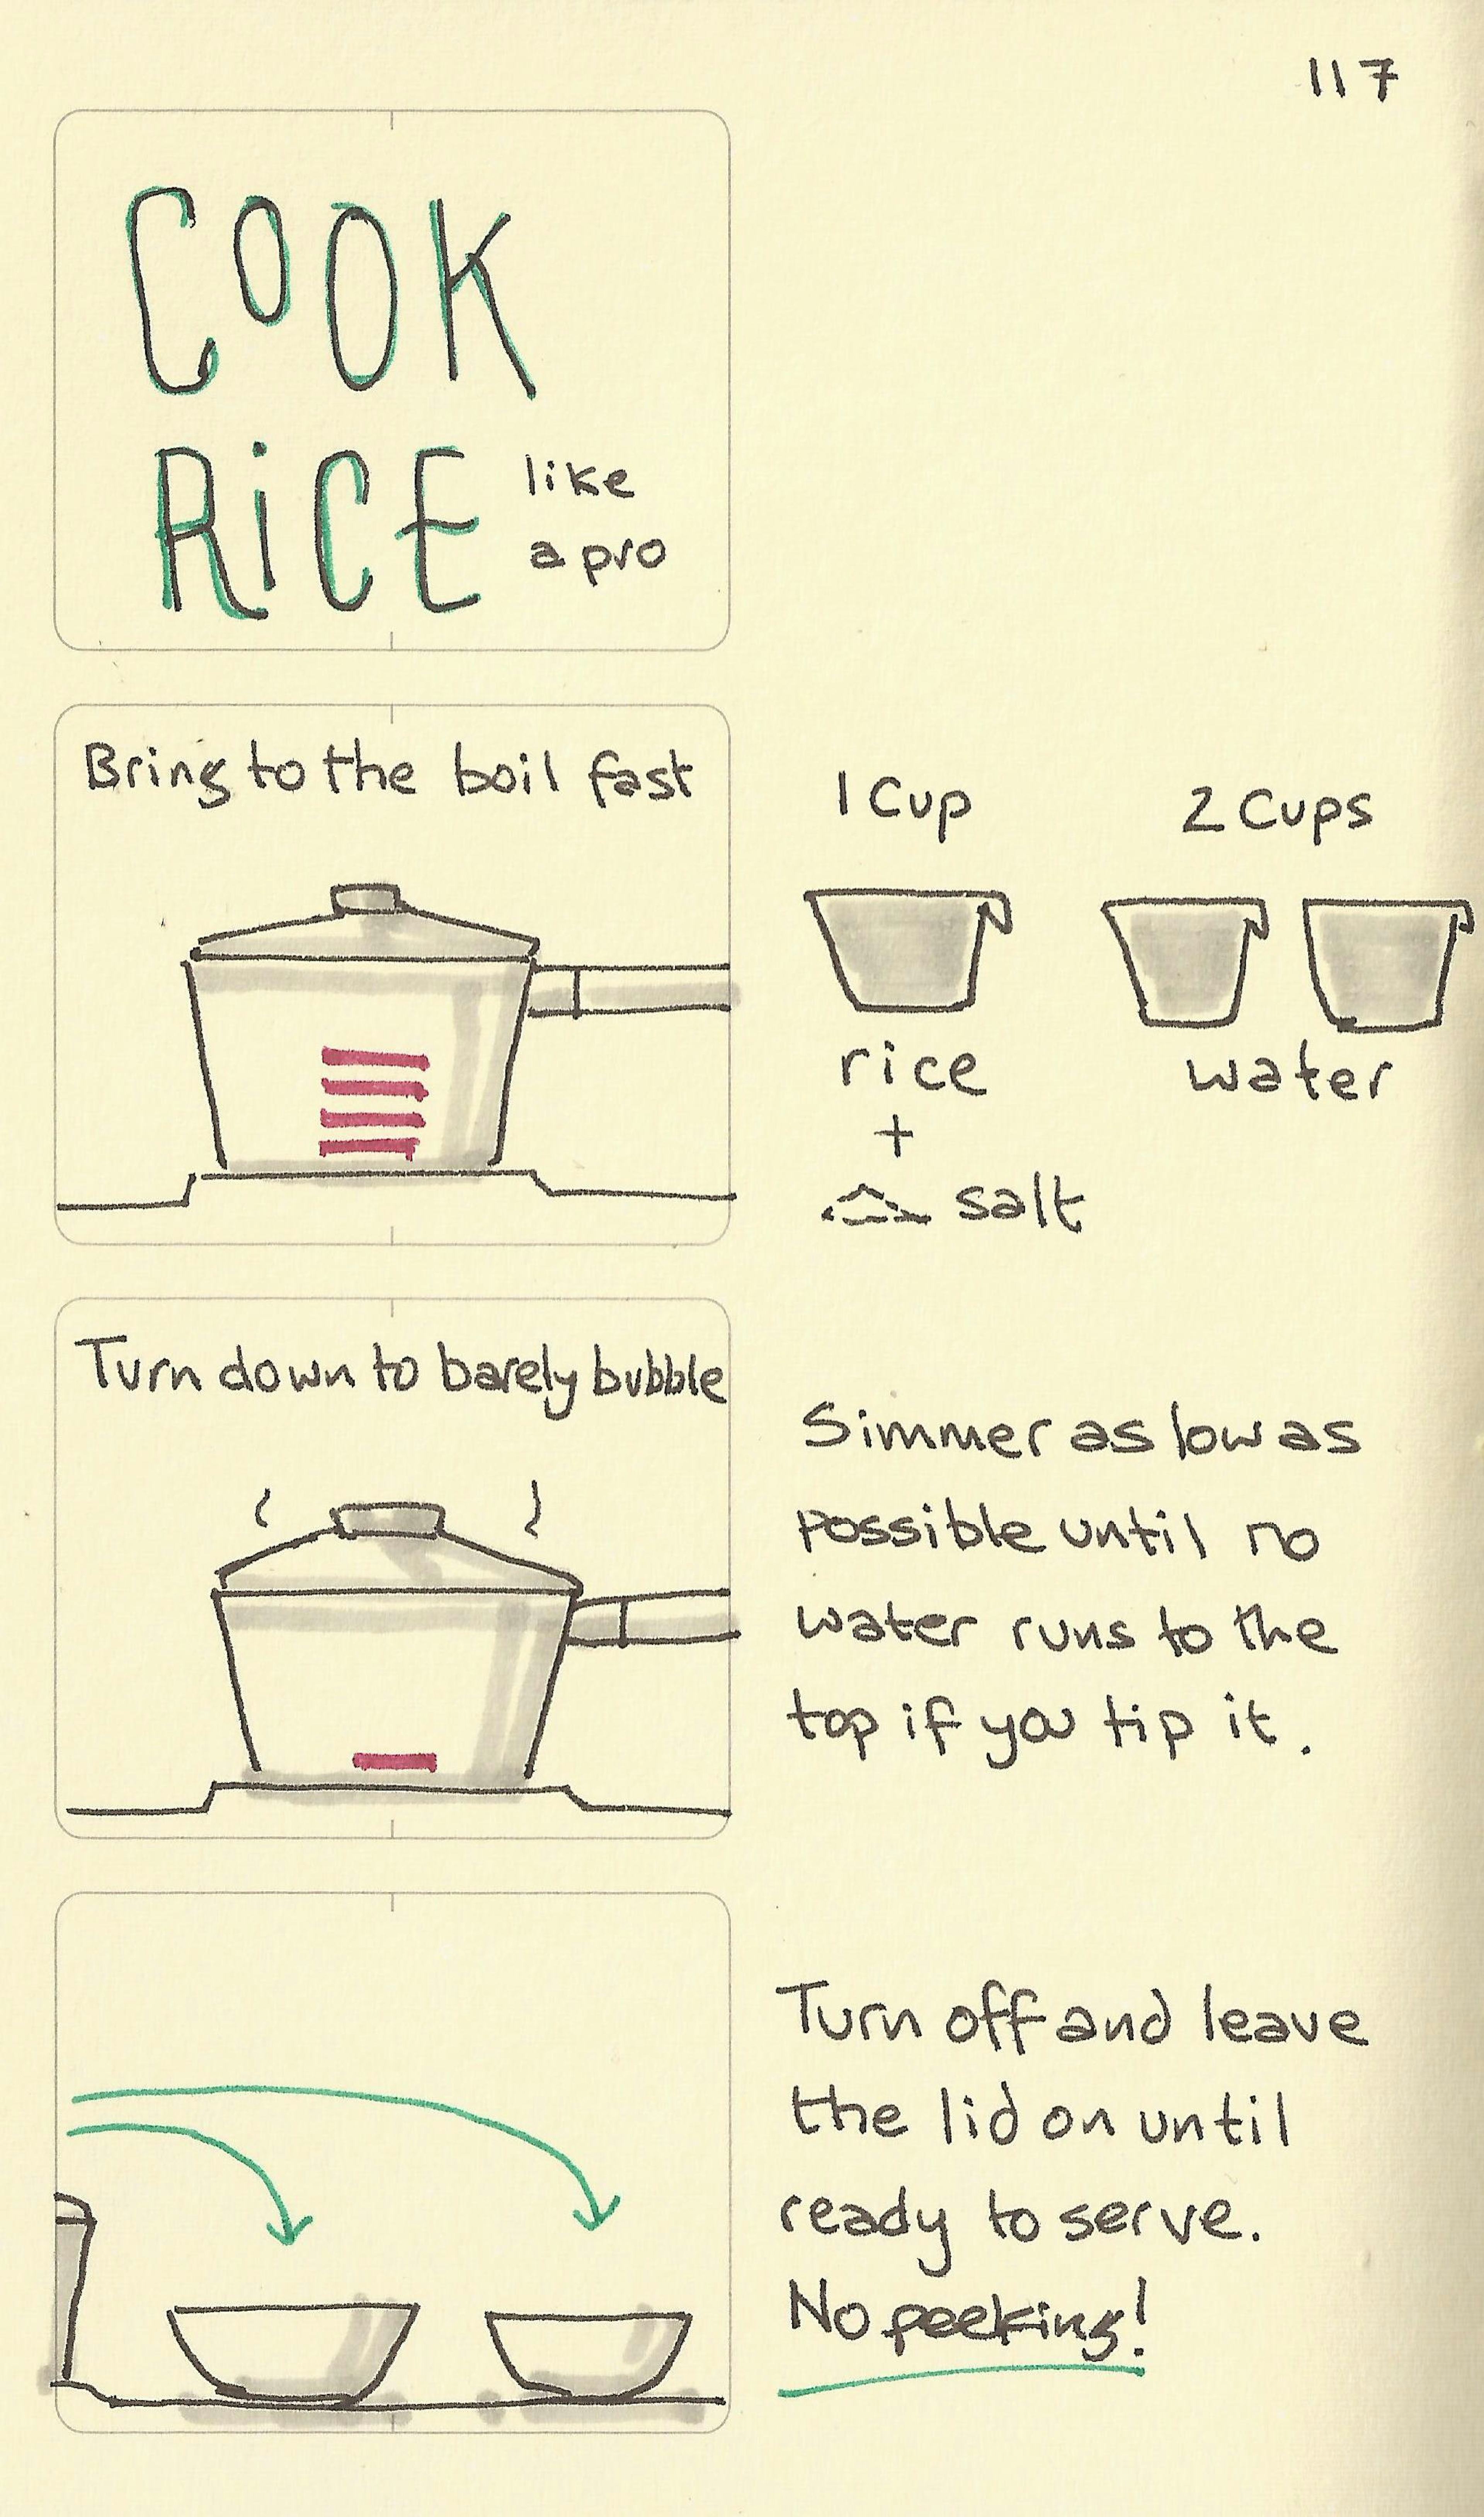 Cook rice like a pro - Sketchplanations